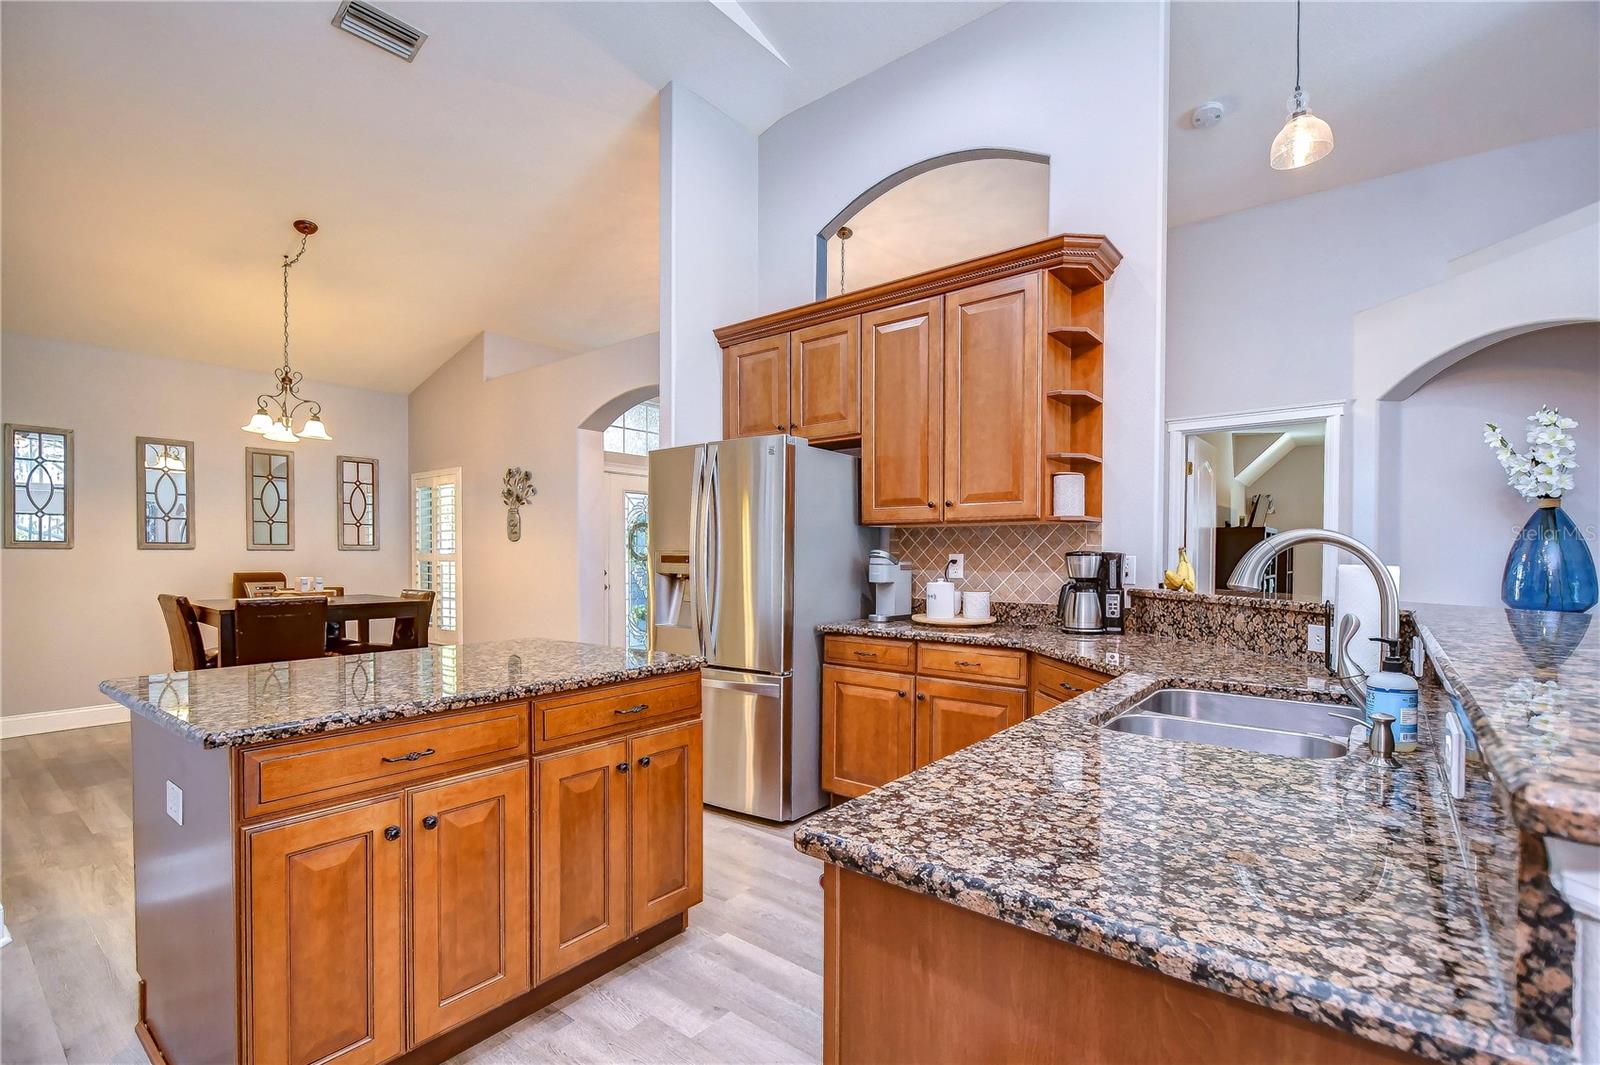 Granite countertops, island, and stainless appliances!